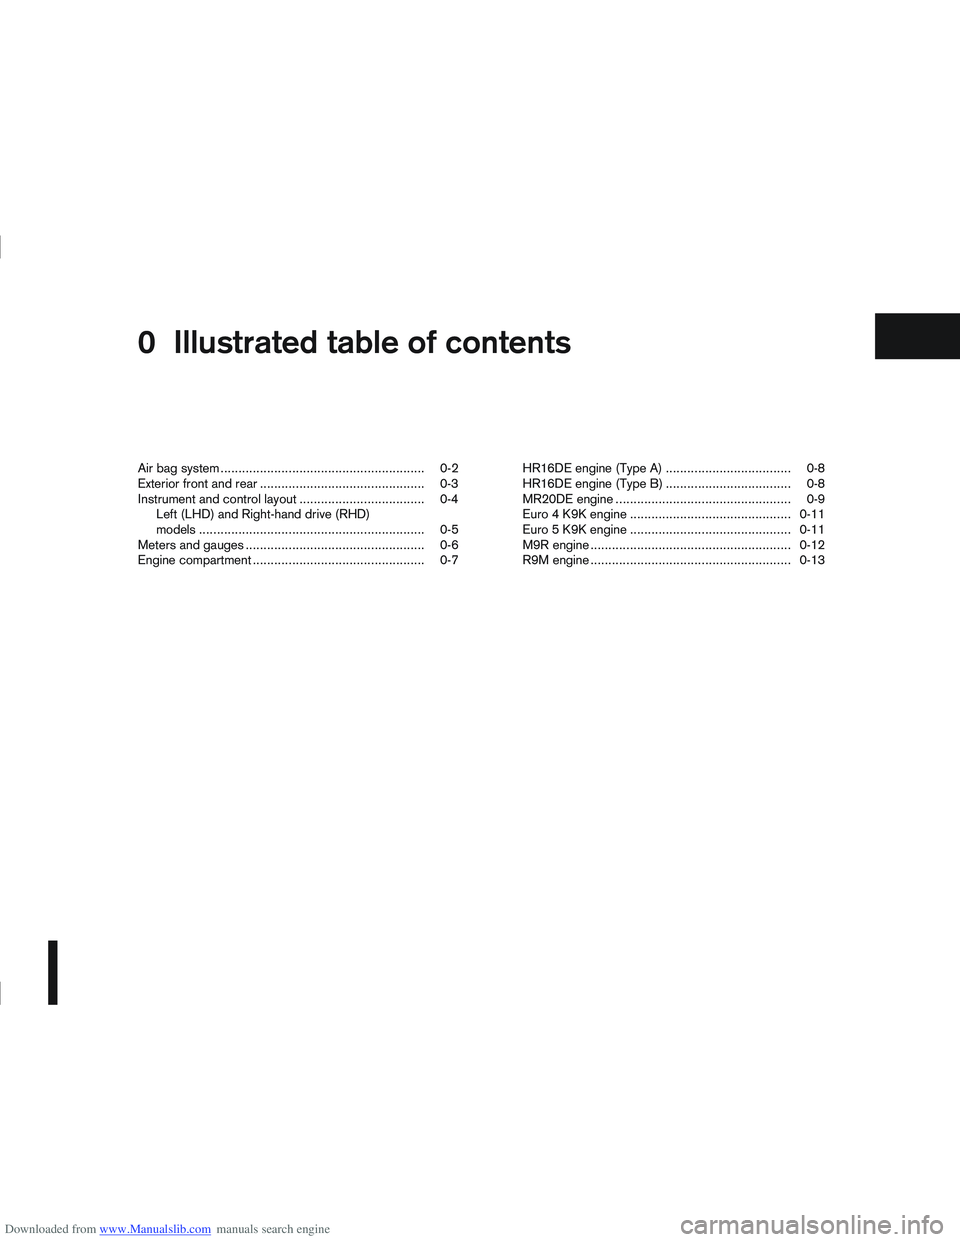 NISSAN QASHQAI 2013  Owners Manual Downloaded from www.Manualslib.com manuals search engine 0Illustrated table of contents
Illustrated table of contents
Air bag system ......................................................... 0-2
Exter